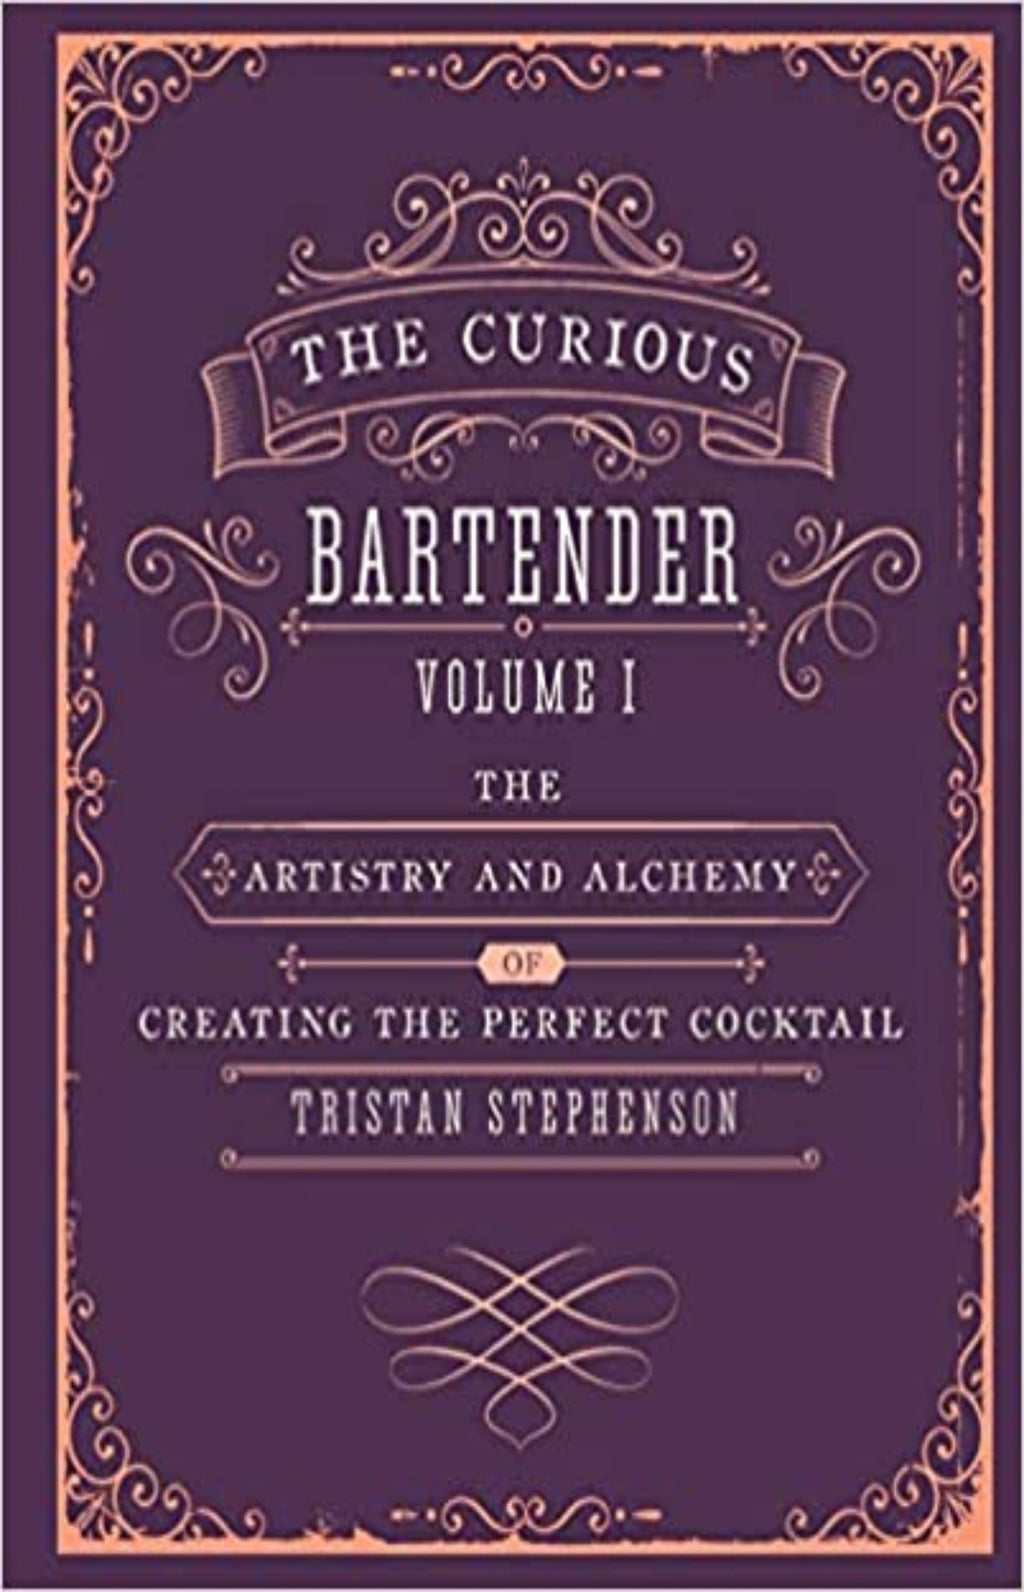 The Curious Bartender - The Artistry And Alchemy Of Creating The Perfect Cocktail